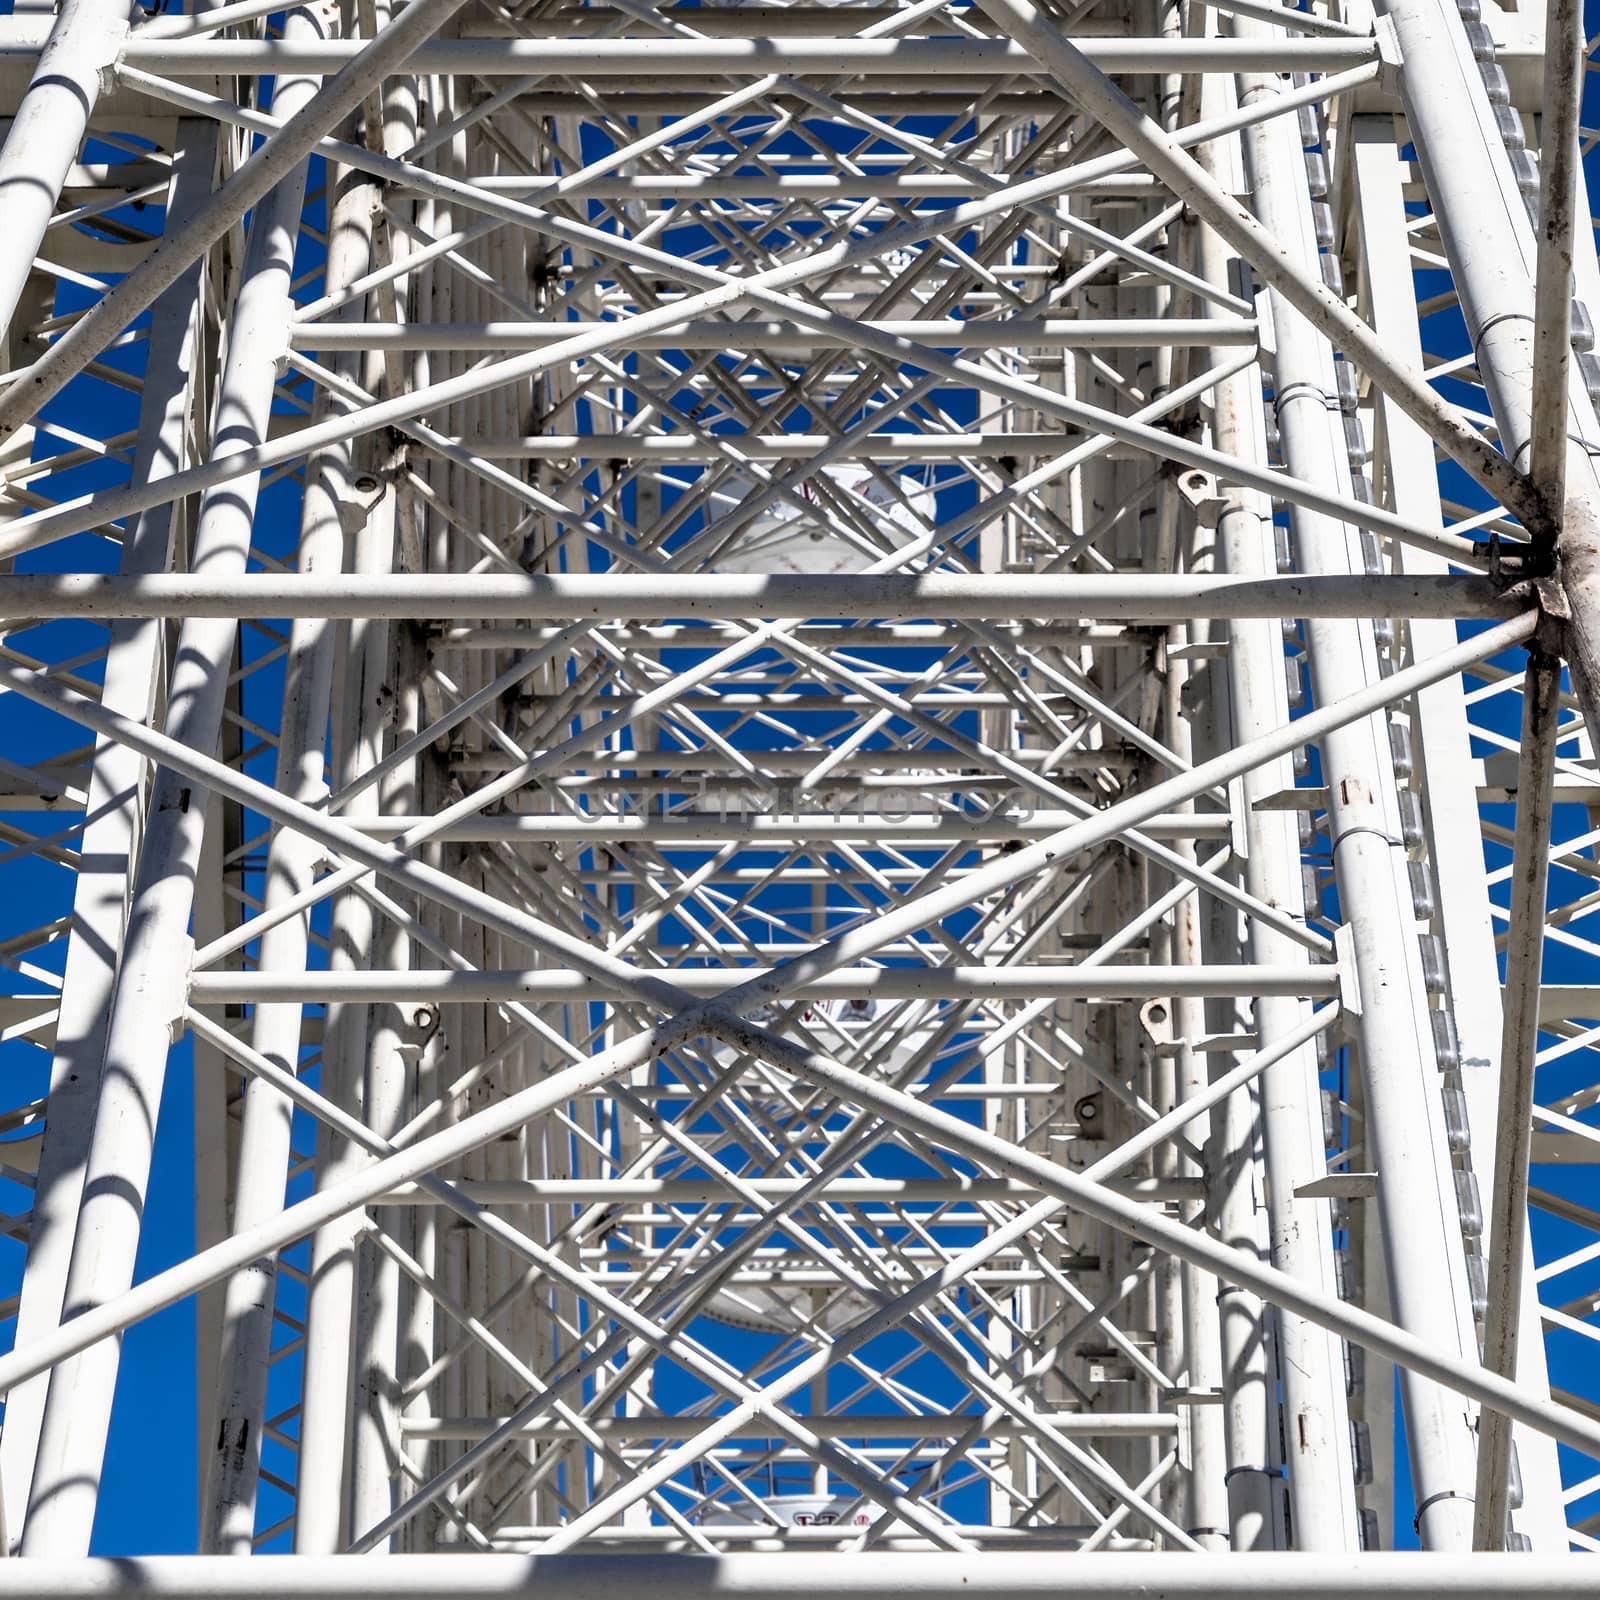 Abstract impression due to the confusing supports, struts and slats on the mount of a Ferris wheel by geogif